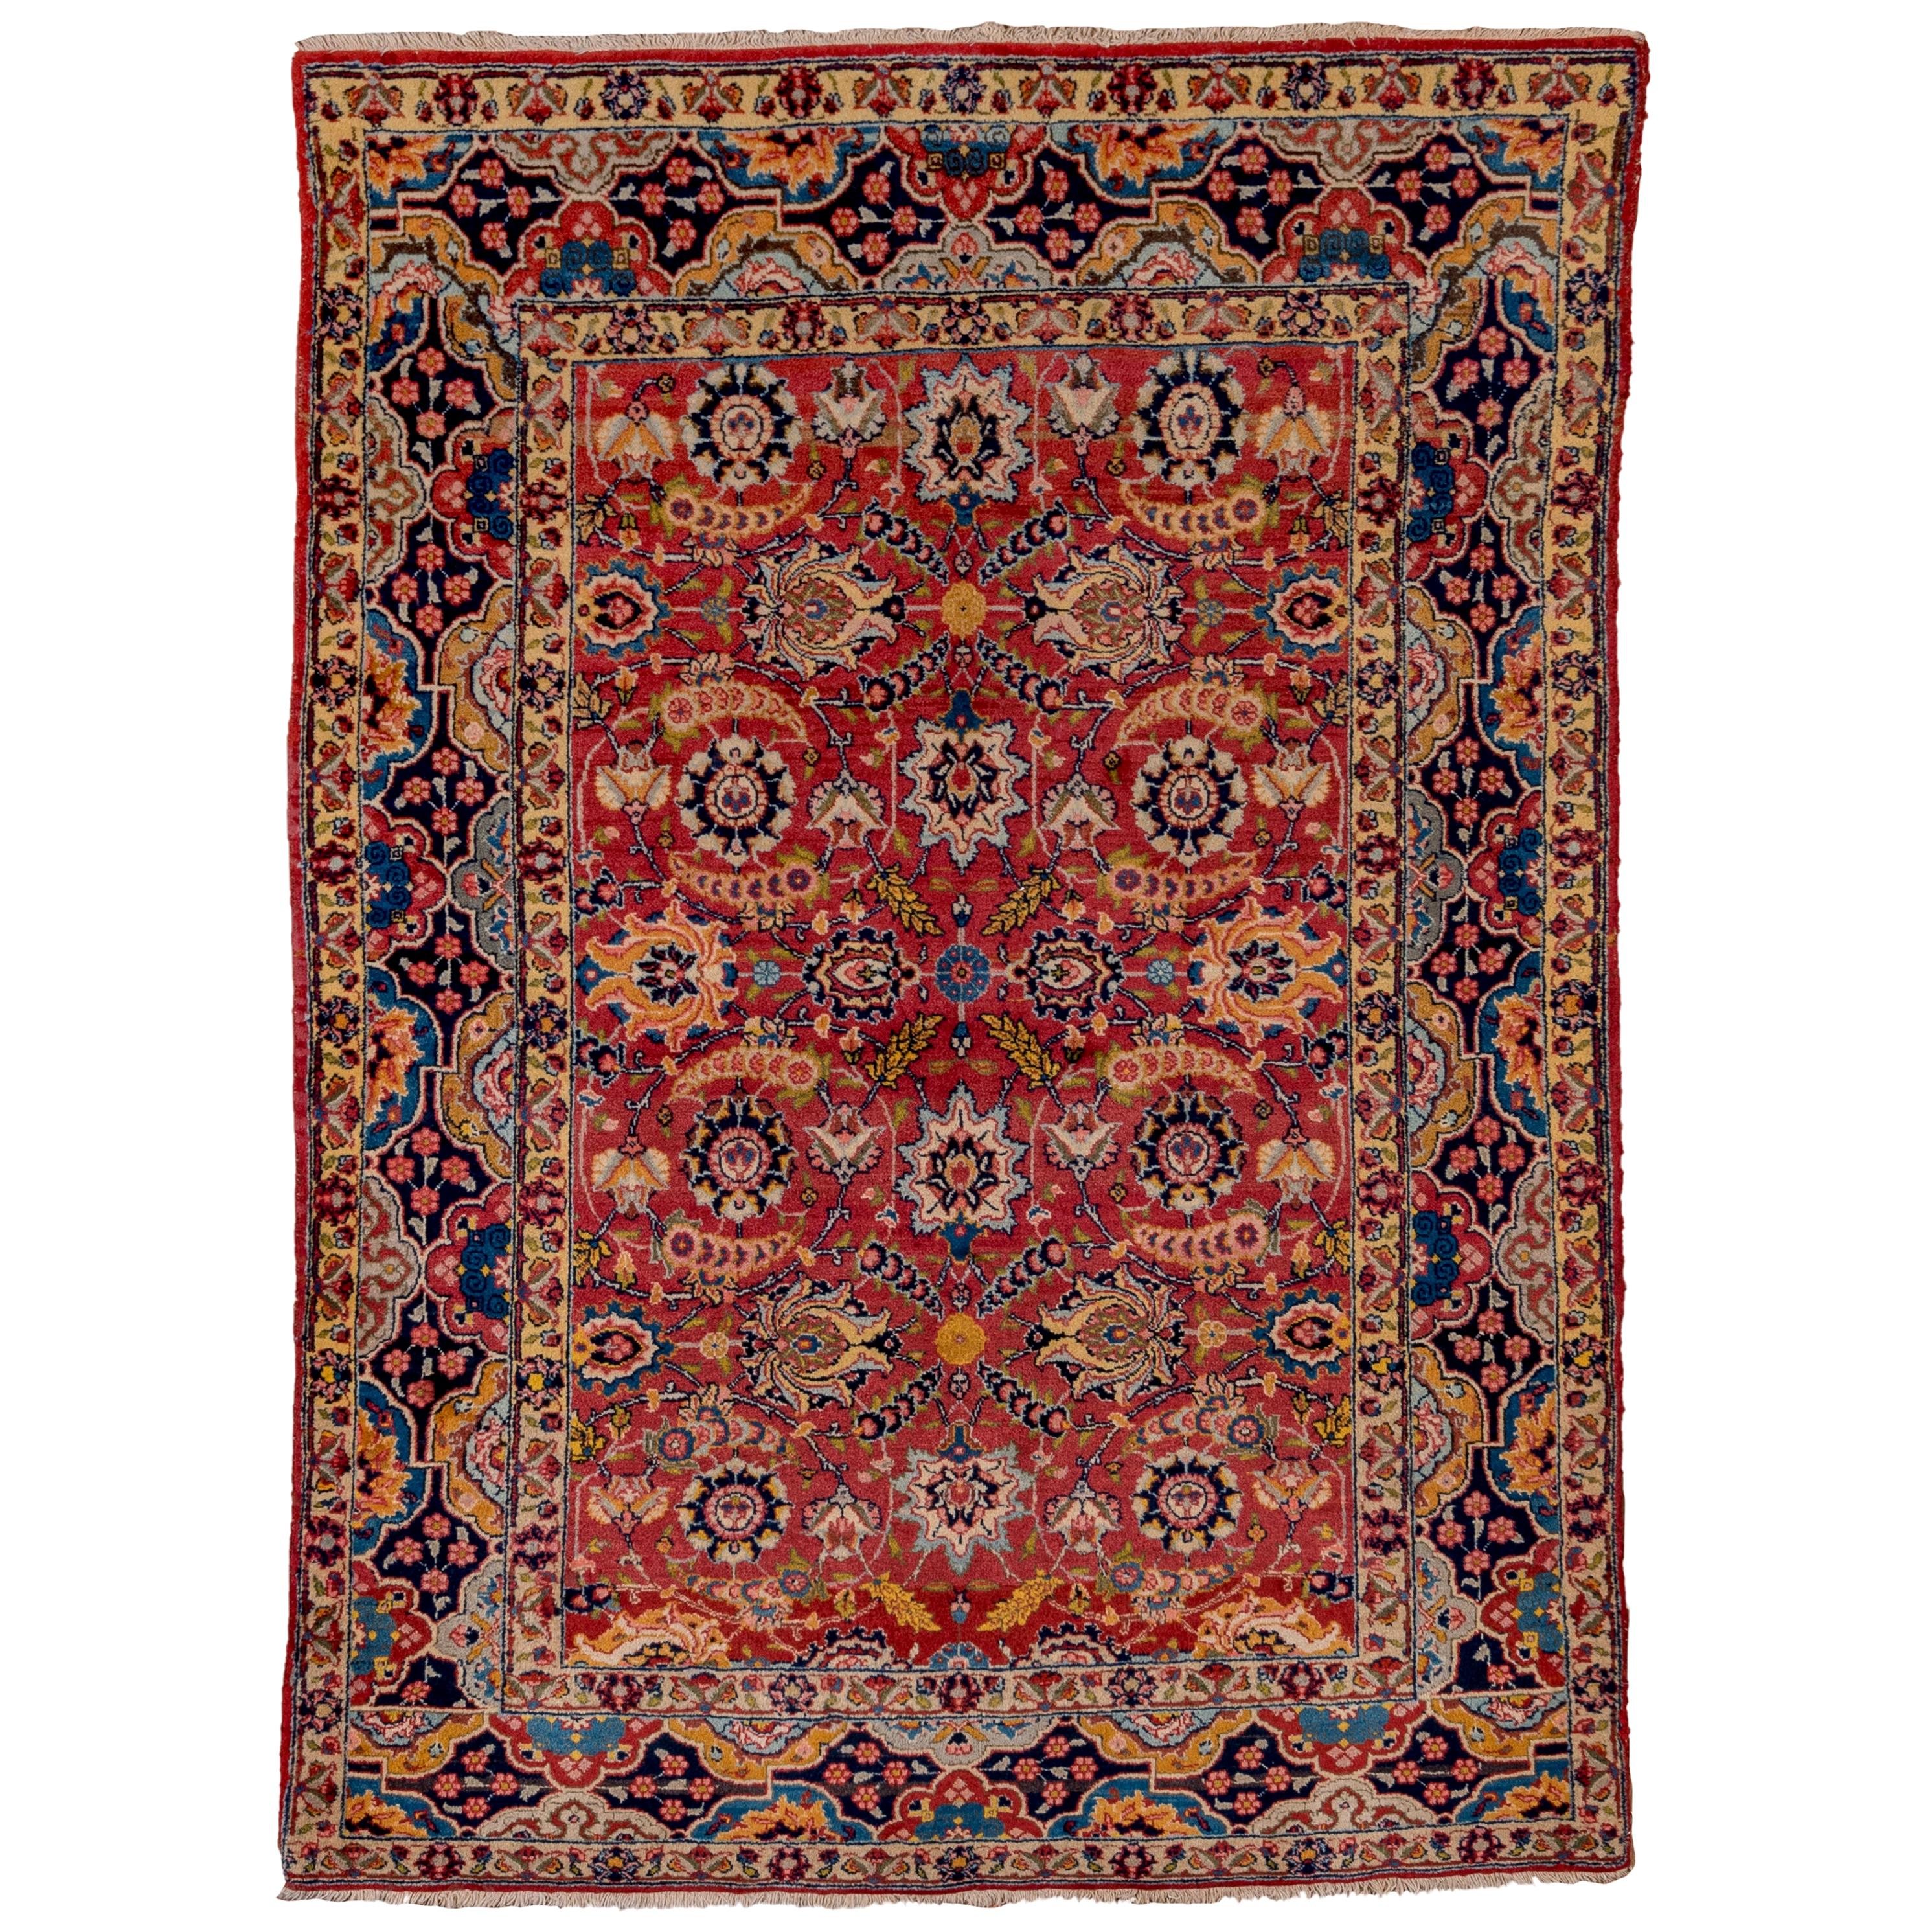 1930s Fine Antique Persian Tabriz Rug, All-Over Red Field, Yellow & Navy Accents